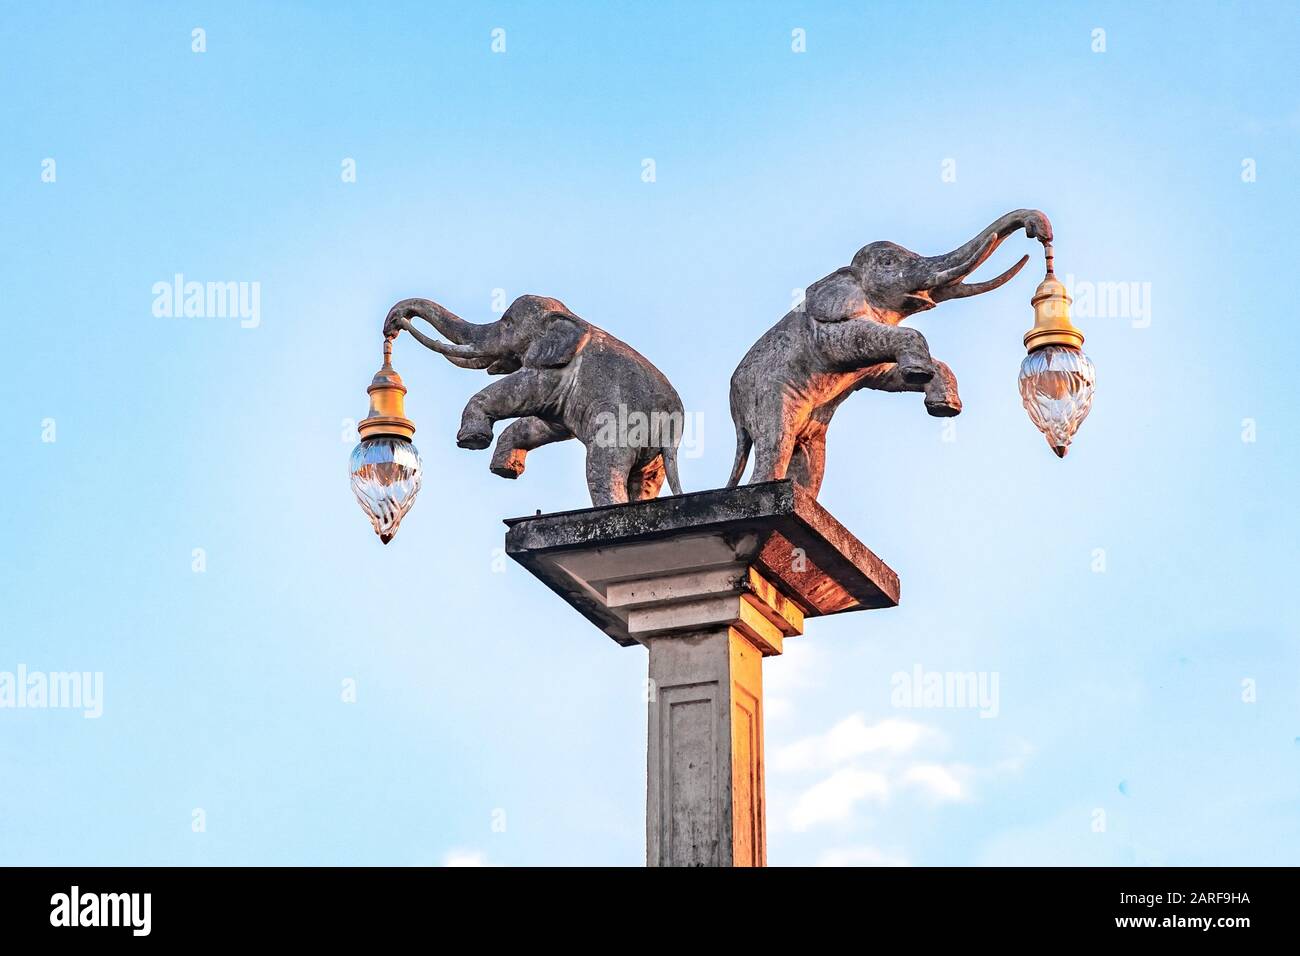 Close-up Elephant sculpture holding street light by its trunk in Krabi Town, Thailand. Stock Photo